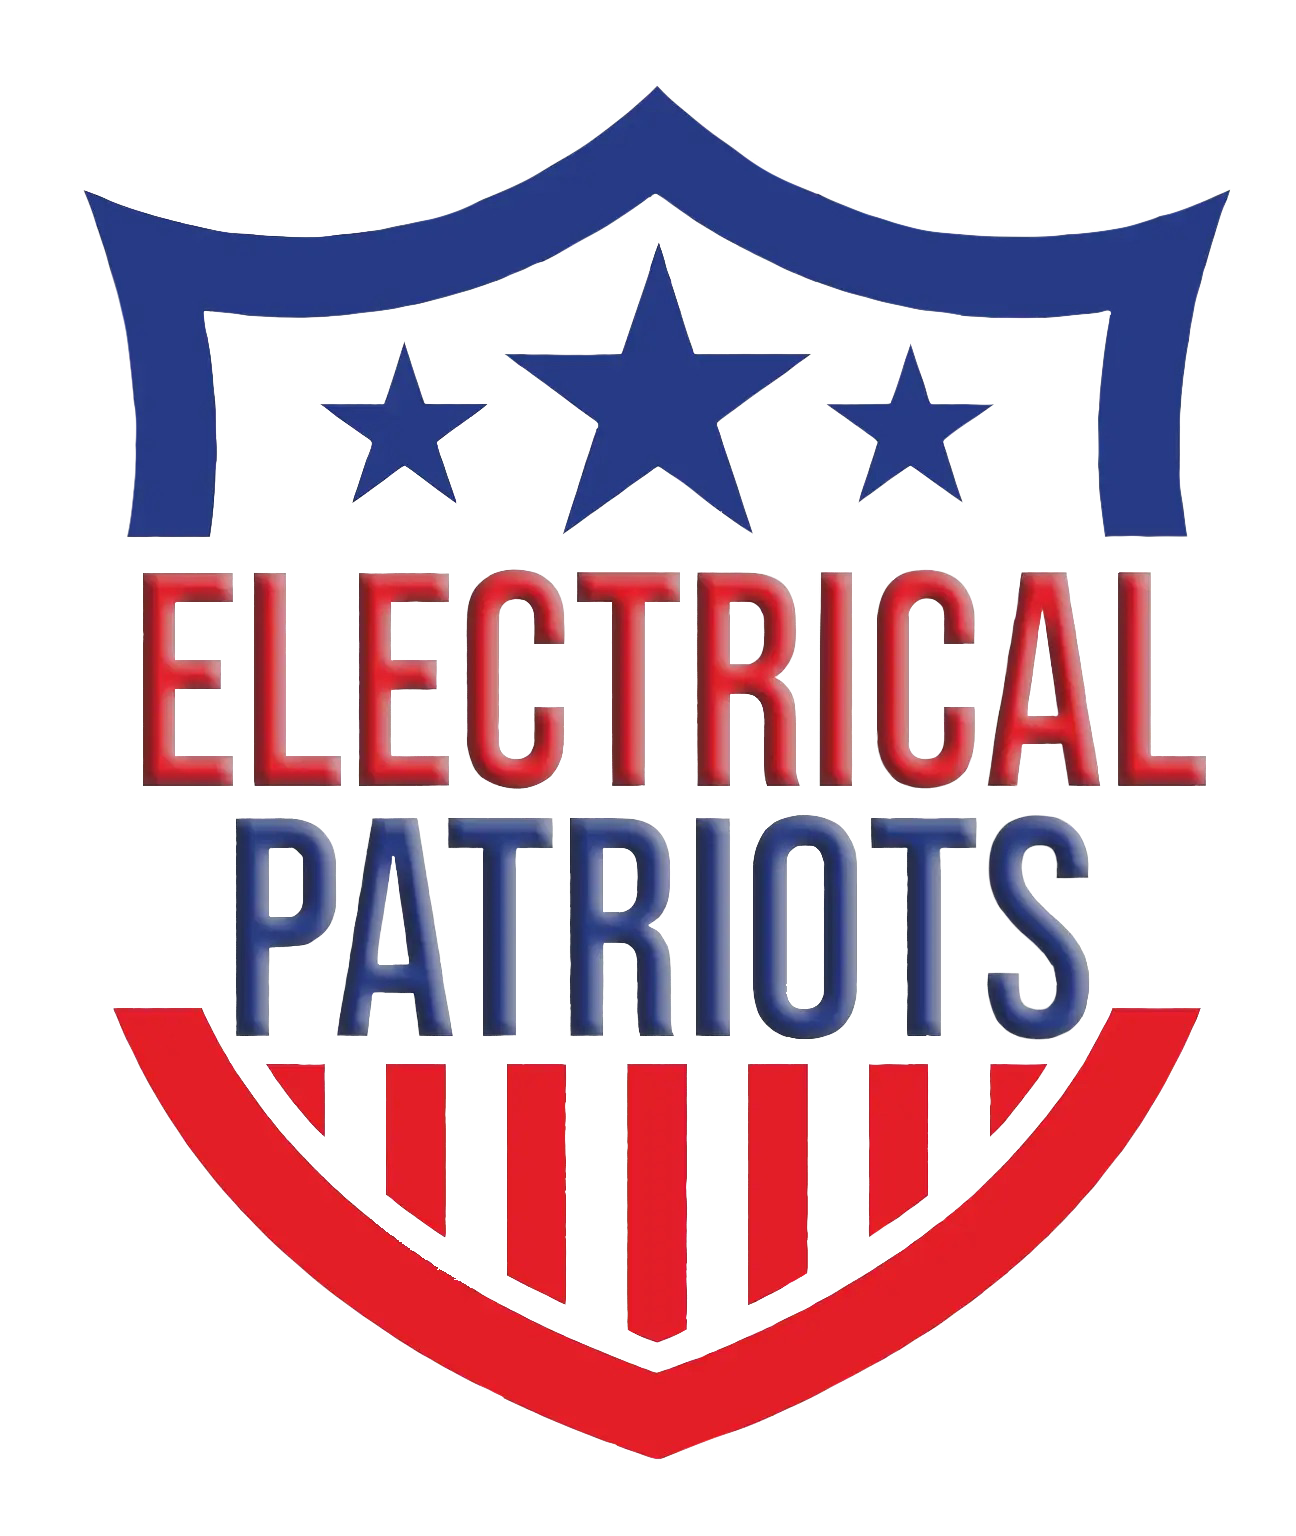 A patriotic shield in red, white, and blue colors, featuring the words 'Electrical Patriots' written across it."